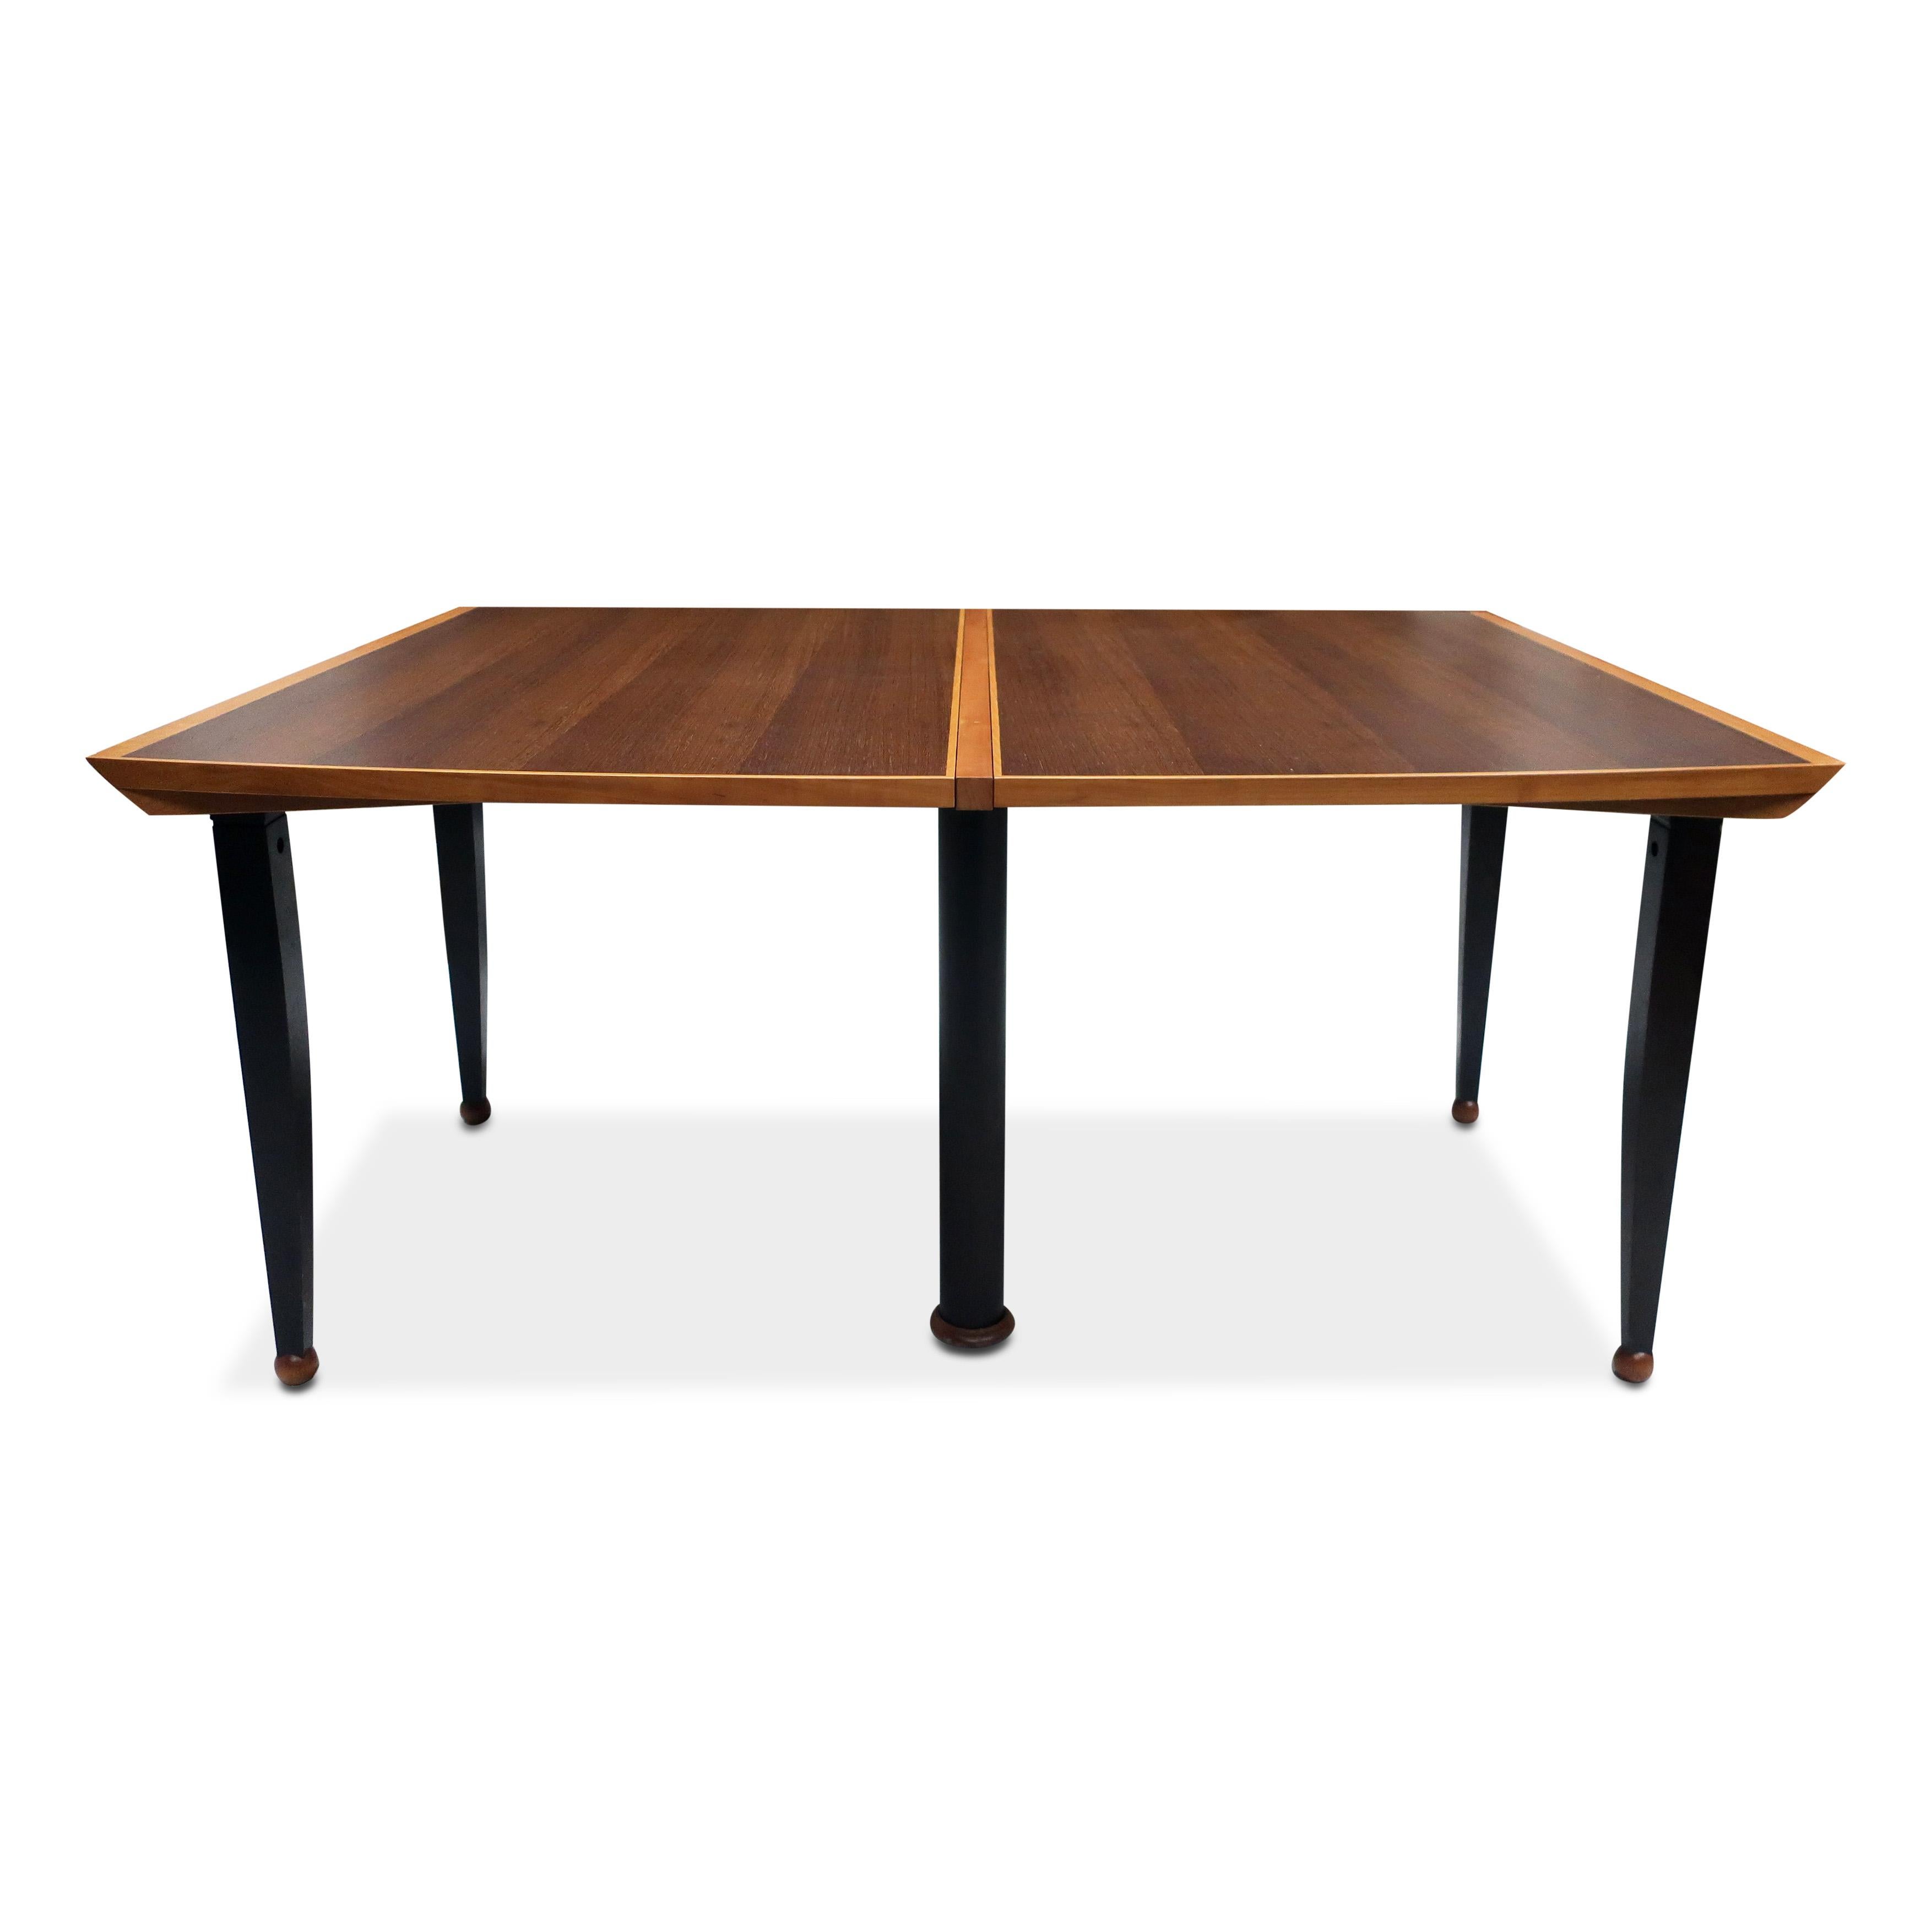 Post-Modern Tabula Magna Dining Table by Oscar Tosquets Blanca for Driade Aleph, '1991' For Sale